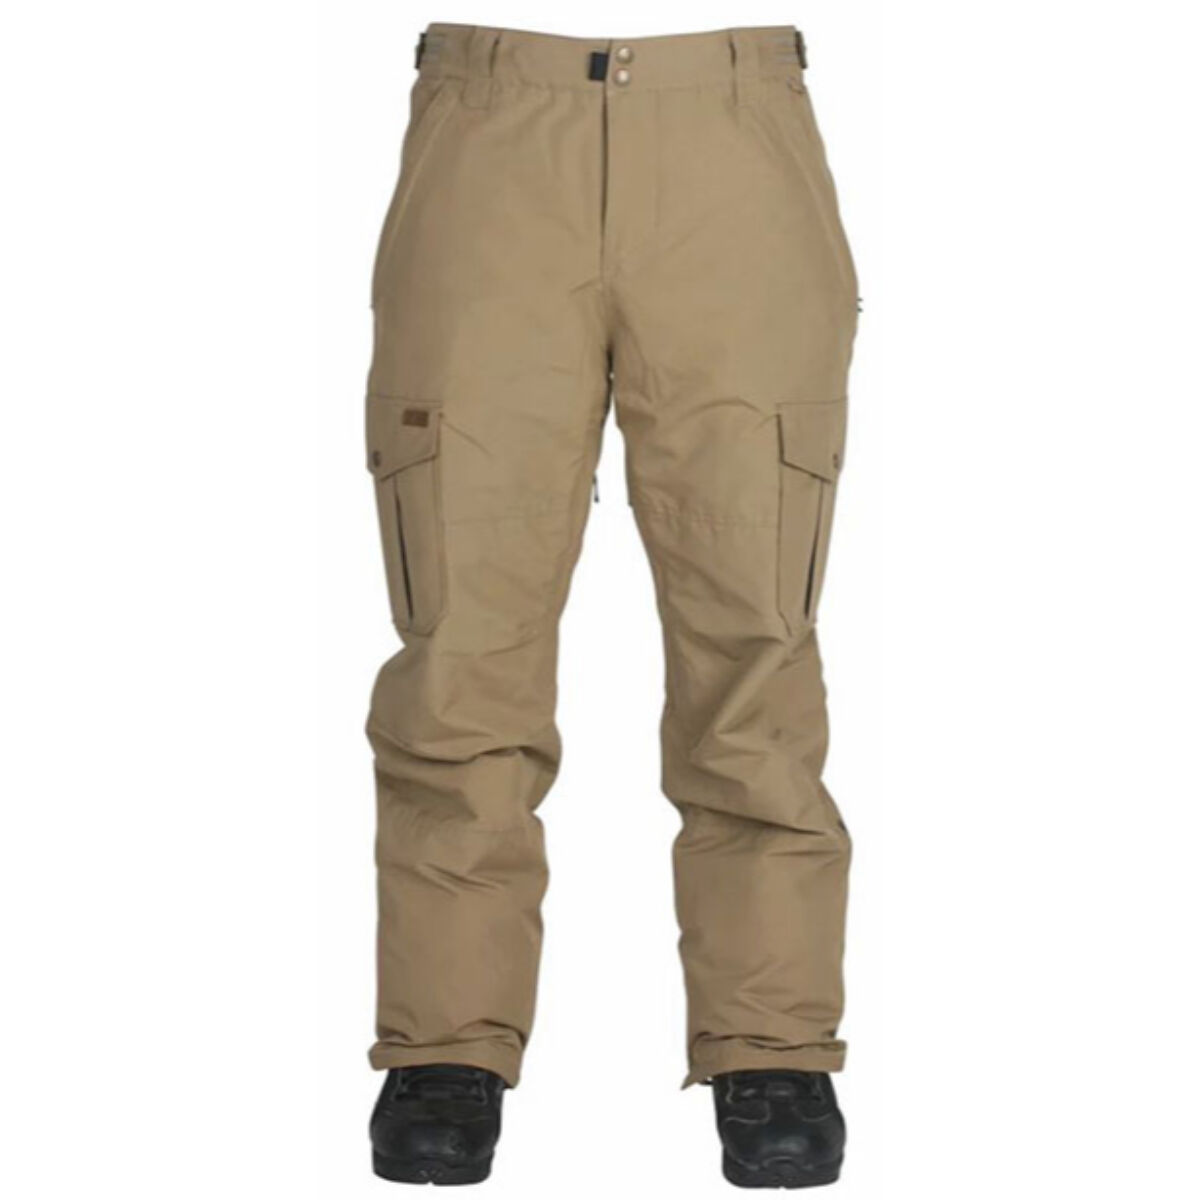 Ride Madrona Snowboard Pant Review  The Good Ride